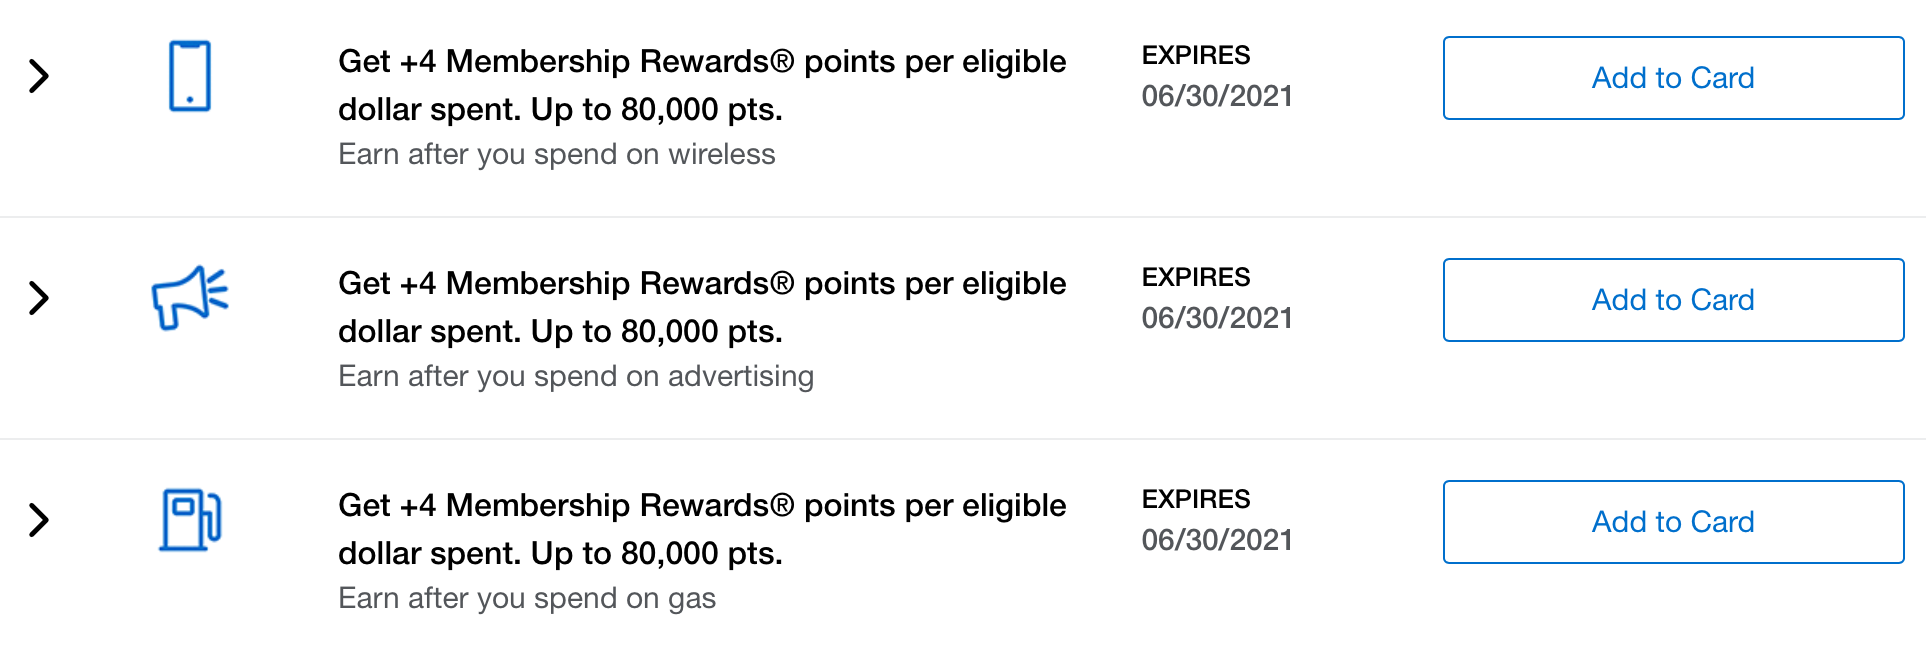 Amex Business Platinum: 5X Points on Shipping, Wireless, Advertising, Gas, Office Supplies